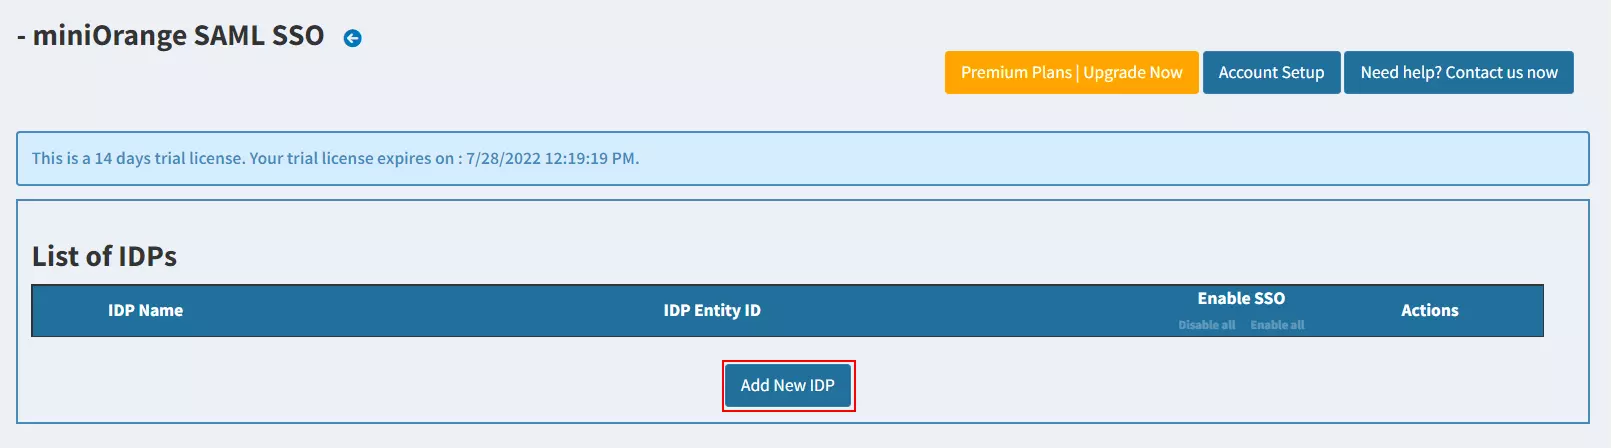 nopCommerce Single Sign-On (SSO) using Salesforce as IDP - Add new IDP